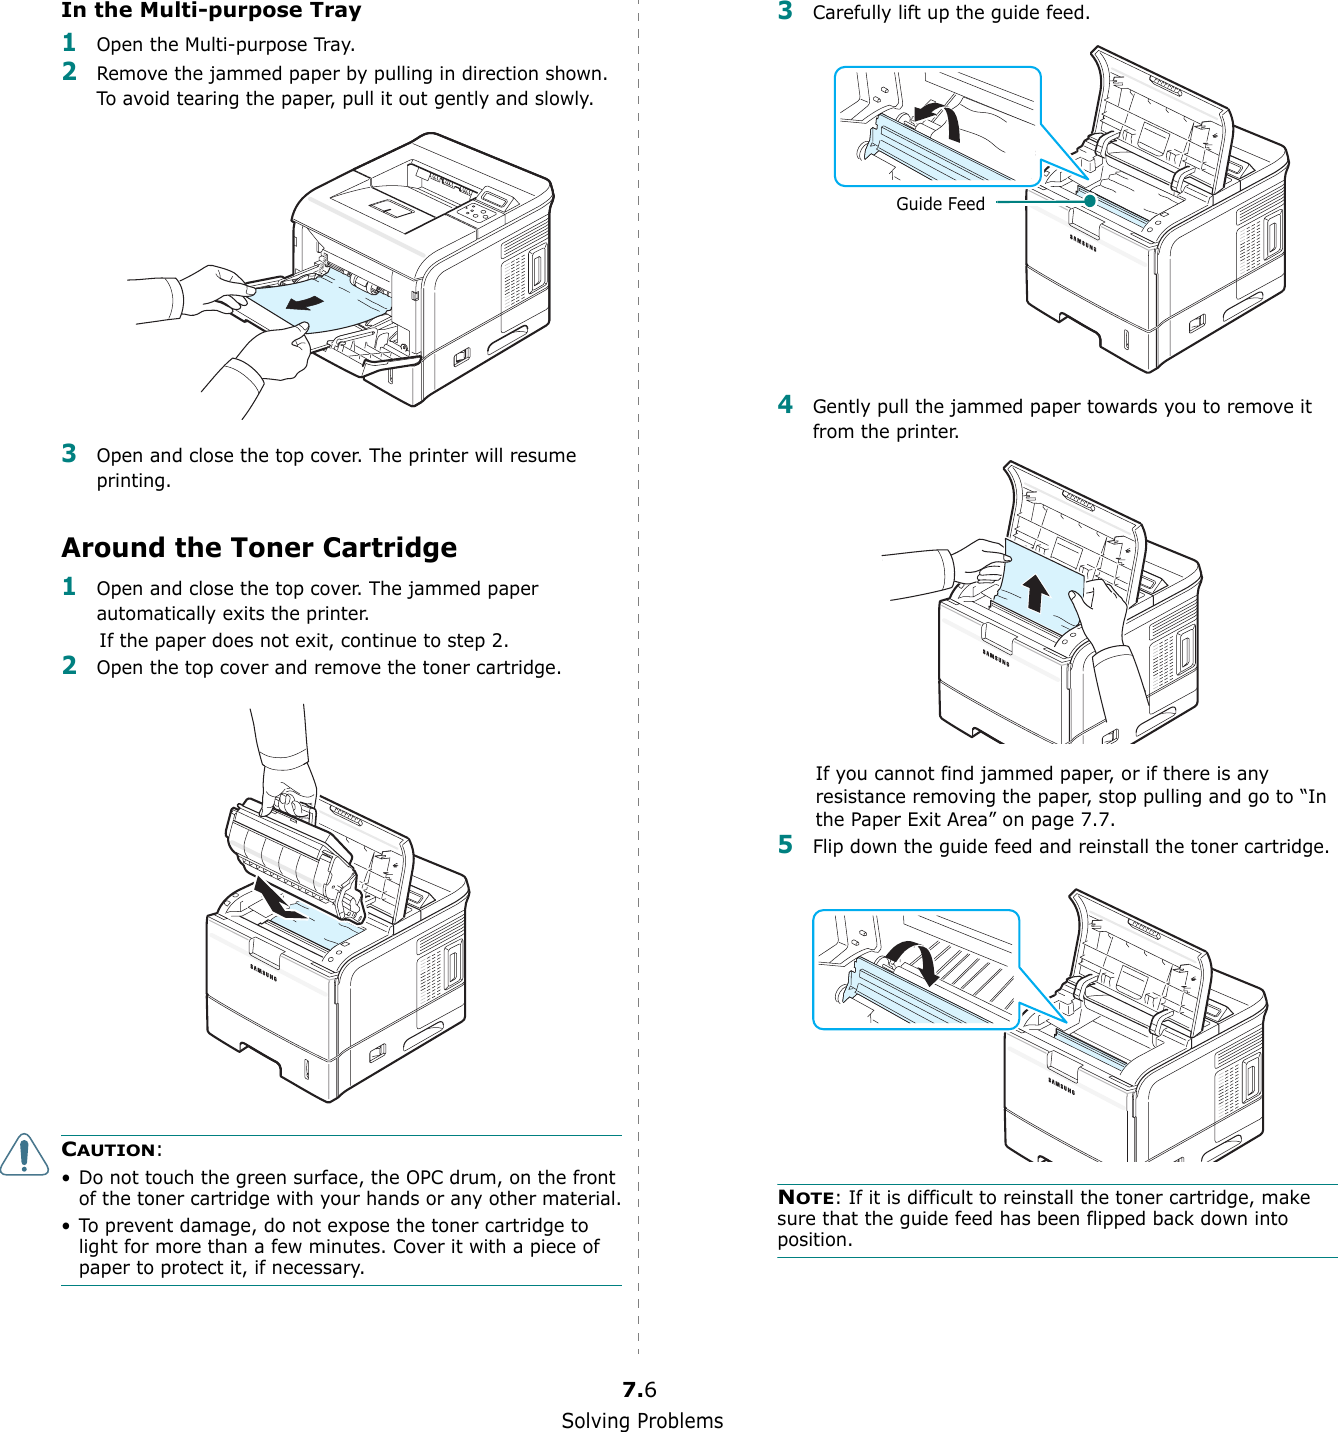 Solving Problems7.6In the Multi-purpose Tray1Open the Multi-purpose Tray.2Remove the jammed paper by pulling in direction shown. To avoid tearing the paper, pull it out gently and slowly.3Open and close the top cover. The printer will resume printing.Around the Toner Cartridge1Open and close the top cover. The jammed paper automatically exits the printer.If the paper does not exit, continue to step 2.2Open the top cover and remove the toner cartridge.CAUTION: • Do not touch the green surface, the OPC drum, on the front of the toner cartridge with your hands or any other material.• To prevent damage, do not expose the toner cartridge to light for more than a few minutes. Cover it with a piece of paper to protect it, if necessary.3Carefully lift up the guide feed.4Gently pull the jammed paper towards you to remove it from the printer.If you cannot find jammed paper, or if there is any resistance removing the paper, stop pulling and go to “In the Paper Exit Area” on page 7.7.5Flip down the guide feed and reinstall the toner cartridge.NOTE: If it is difficult to reinstall the toner cartridge, make sure that the guide feed has been flipped back down into position.Guide Feed